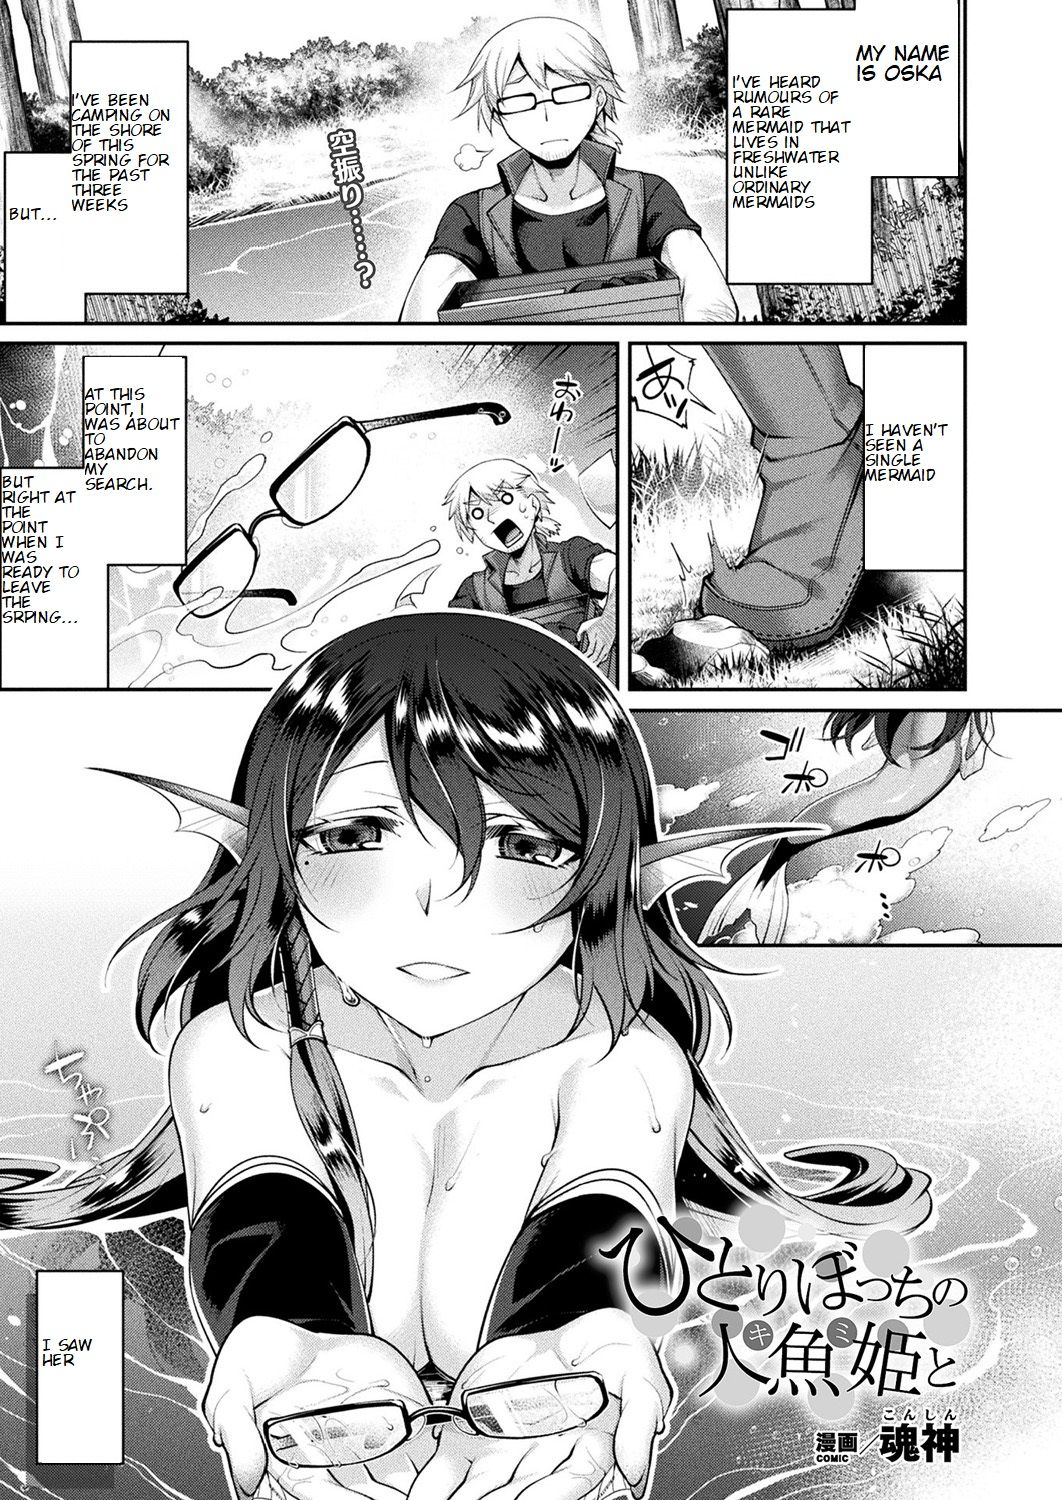 With A Lonely Mermaid Princess [Konshin] - Read Hentai Manga, Hentai Haven,  E hentai, Manhwa Hentai, Manhwa 18, Hentai Comics, Manga Hentai